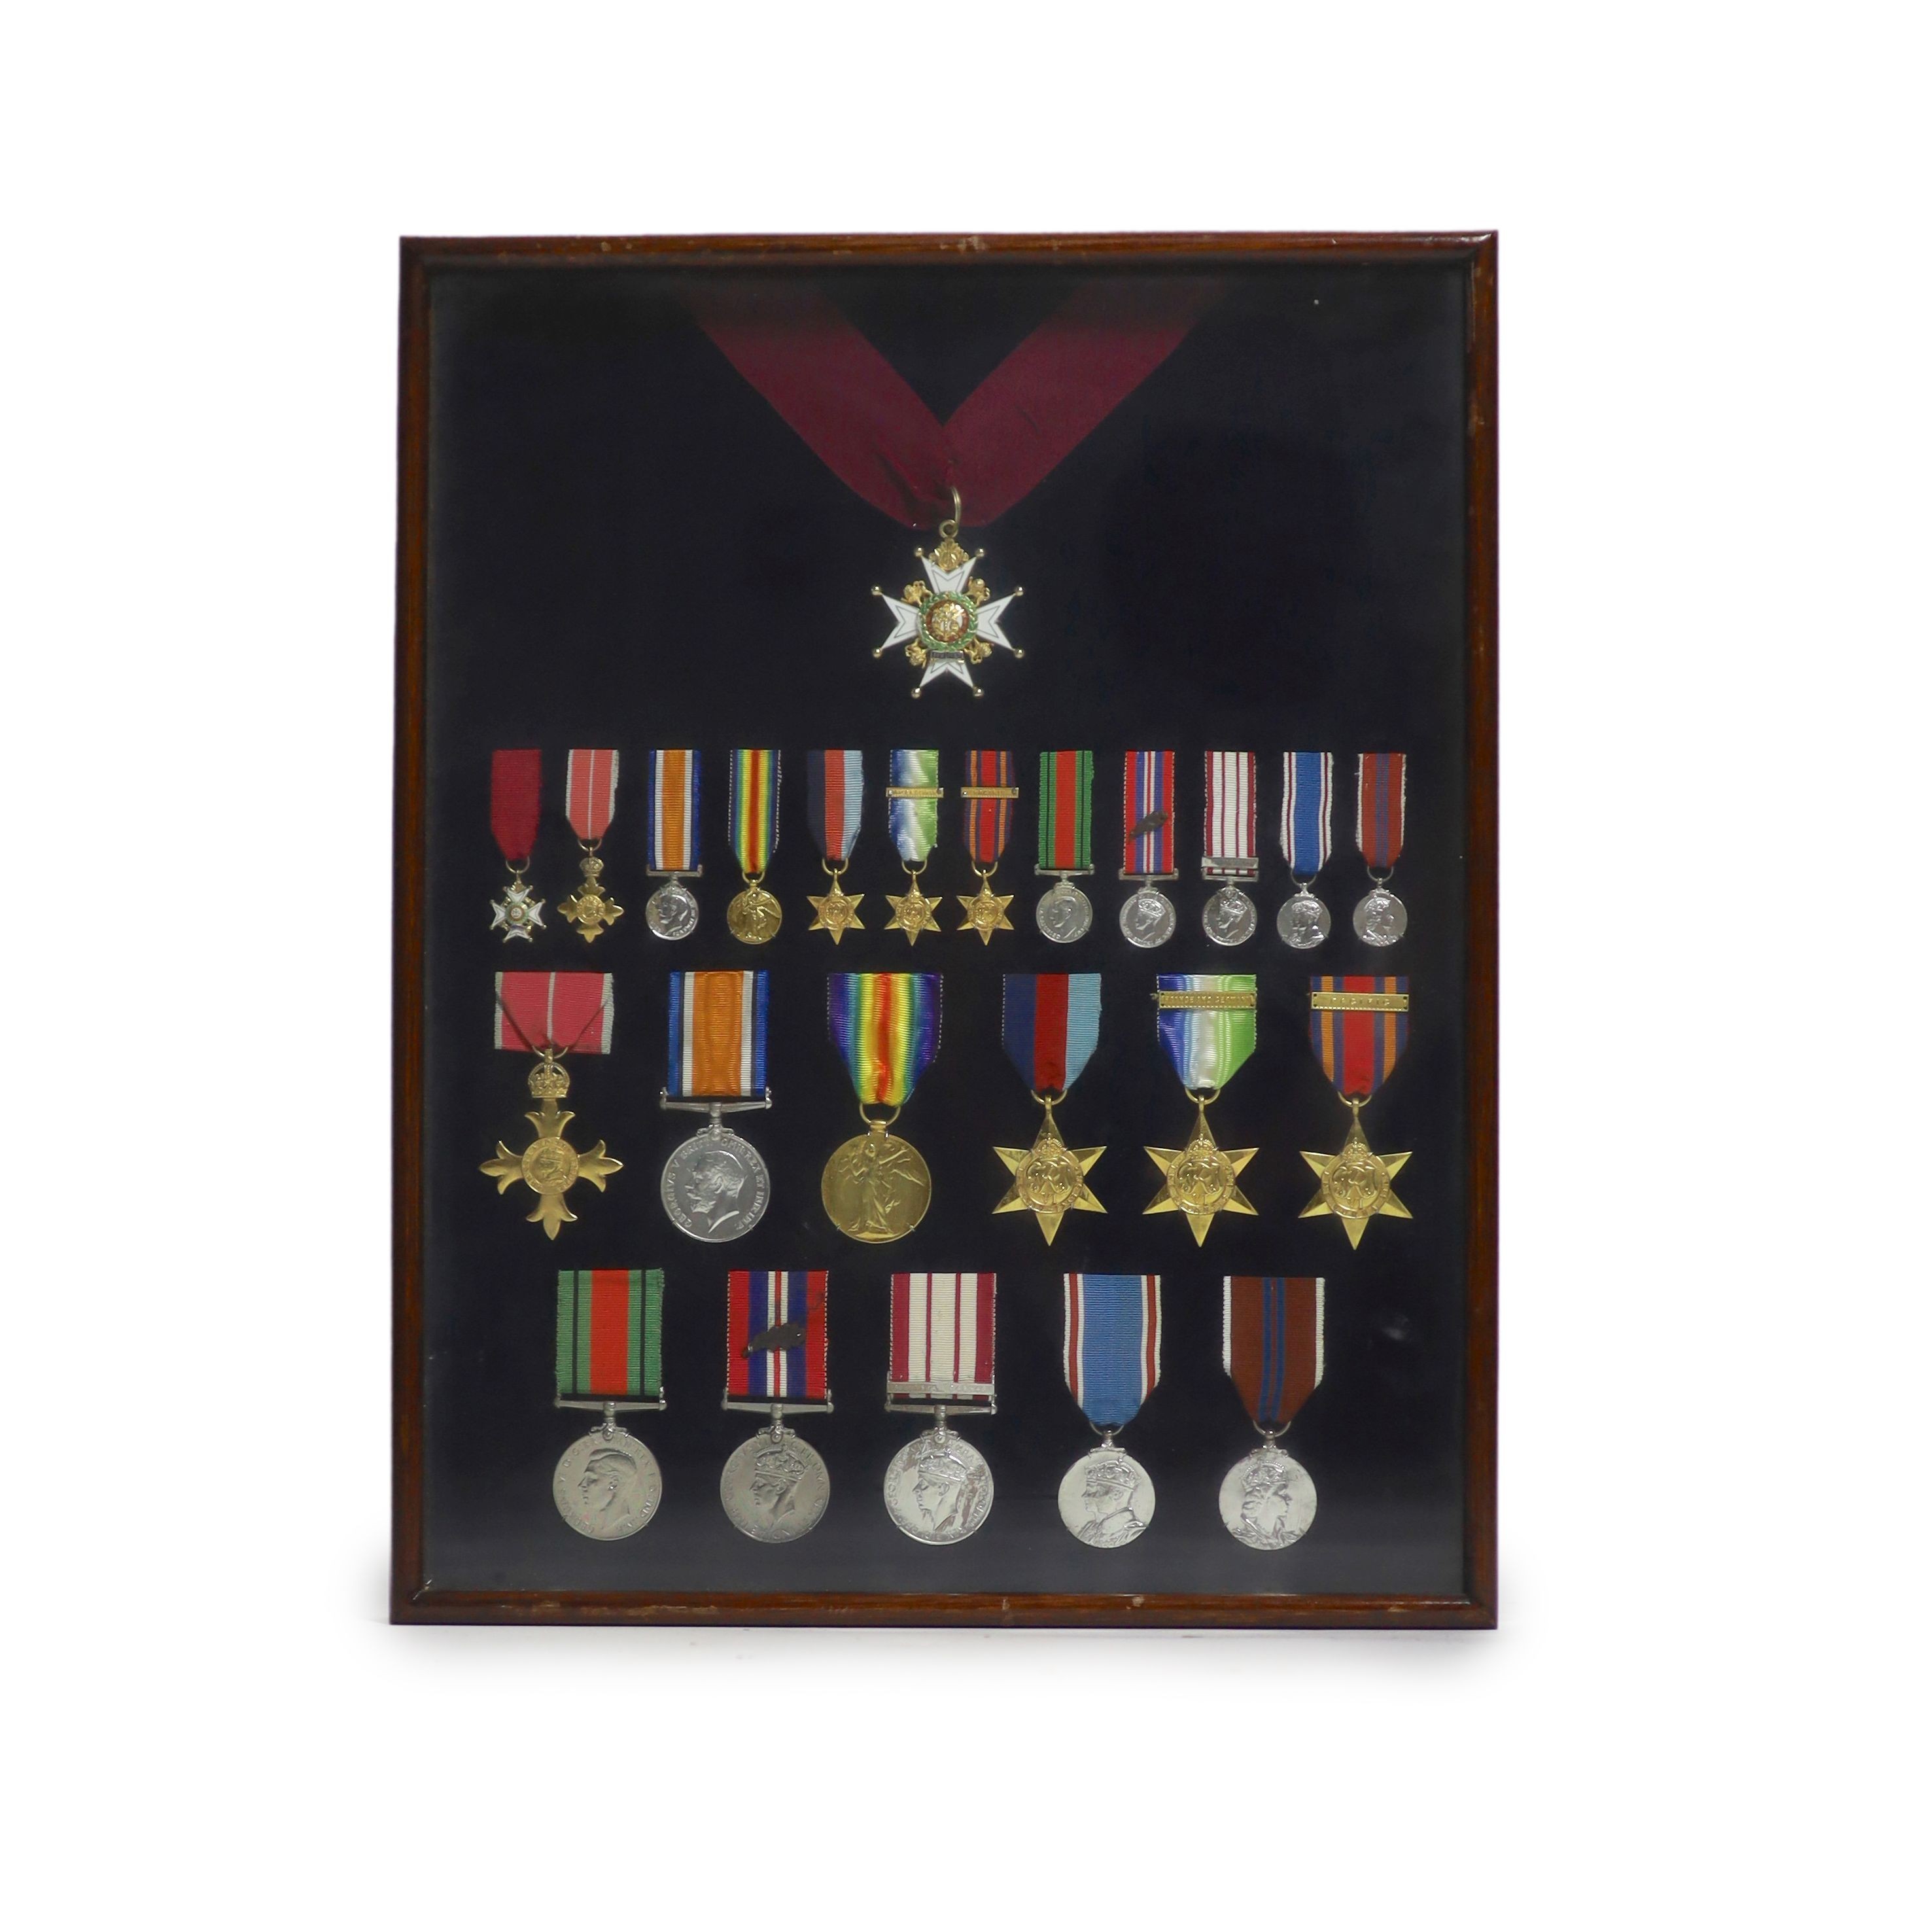 A cased WWI, WWII and Military C.B. medal group to Rear-Admiral John Dent R.N. (1899-1973) and a